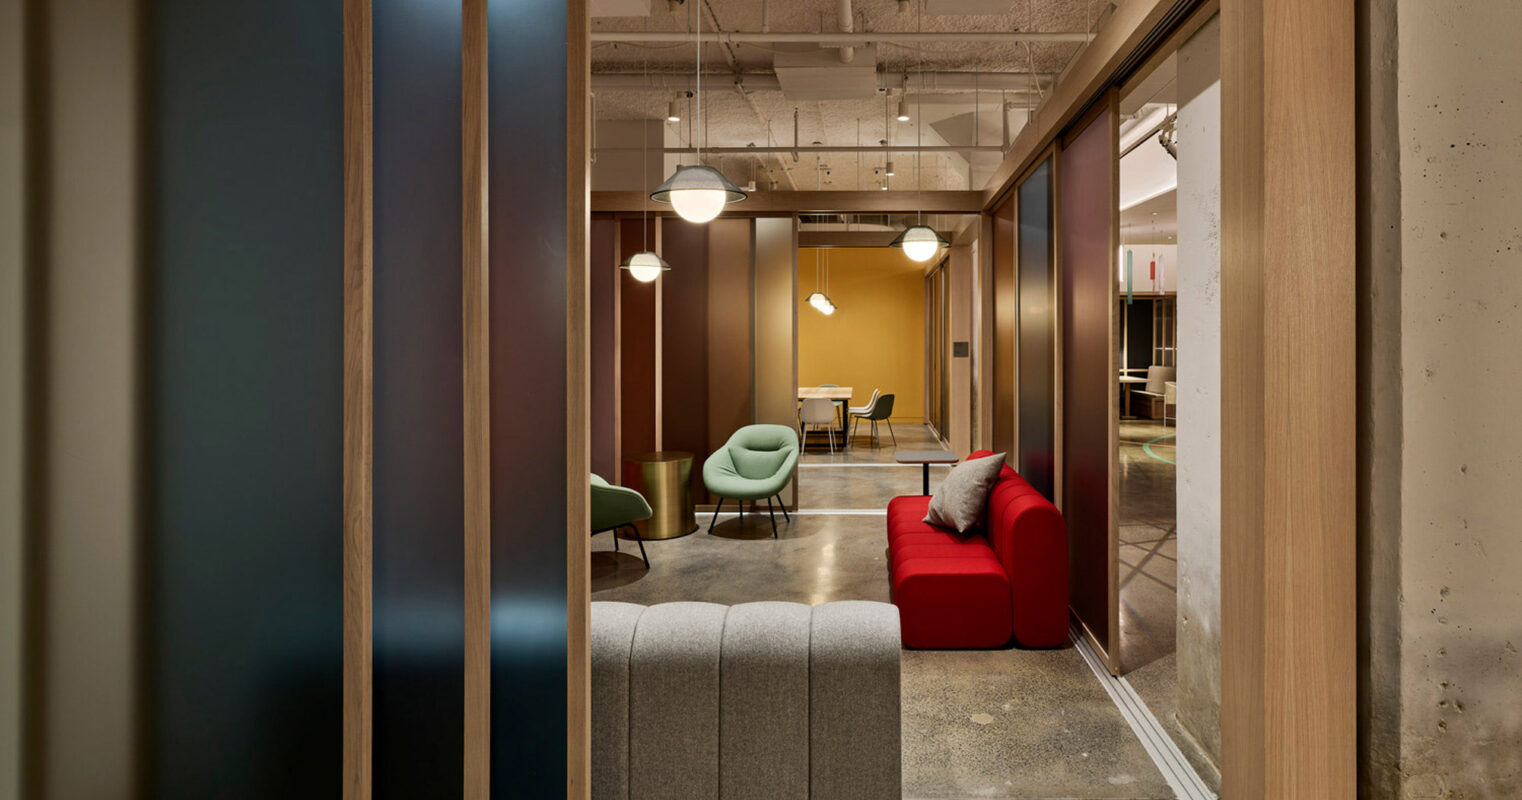 Modern office lounge with translucent sliding doors, featuring a mix of plush red armchairs and minimalist green chairs around a coffee table, complemented by warm pendant lighting and exposed concrete ceiling.